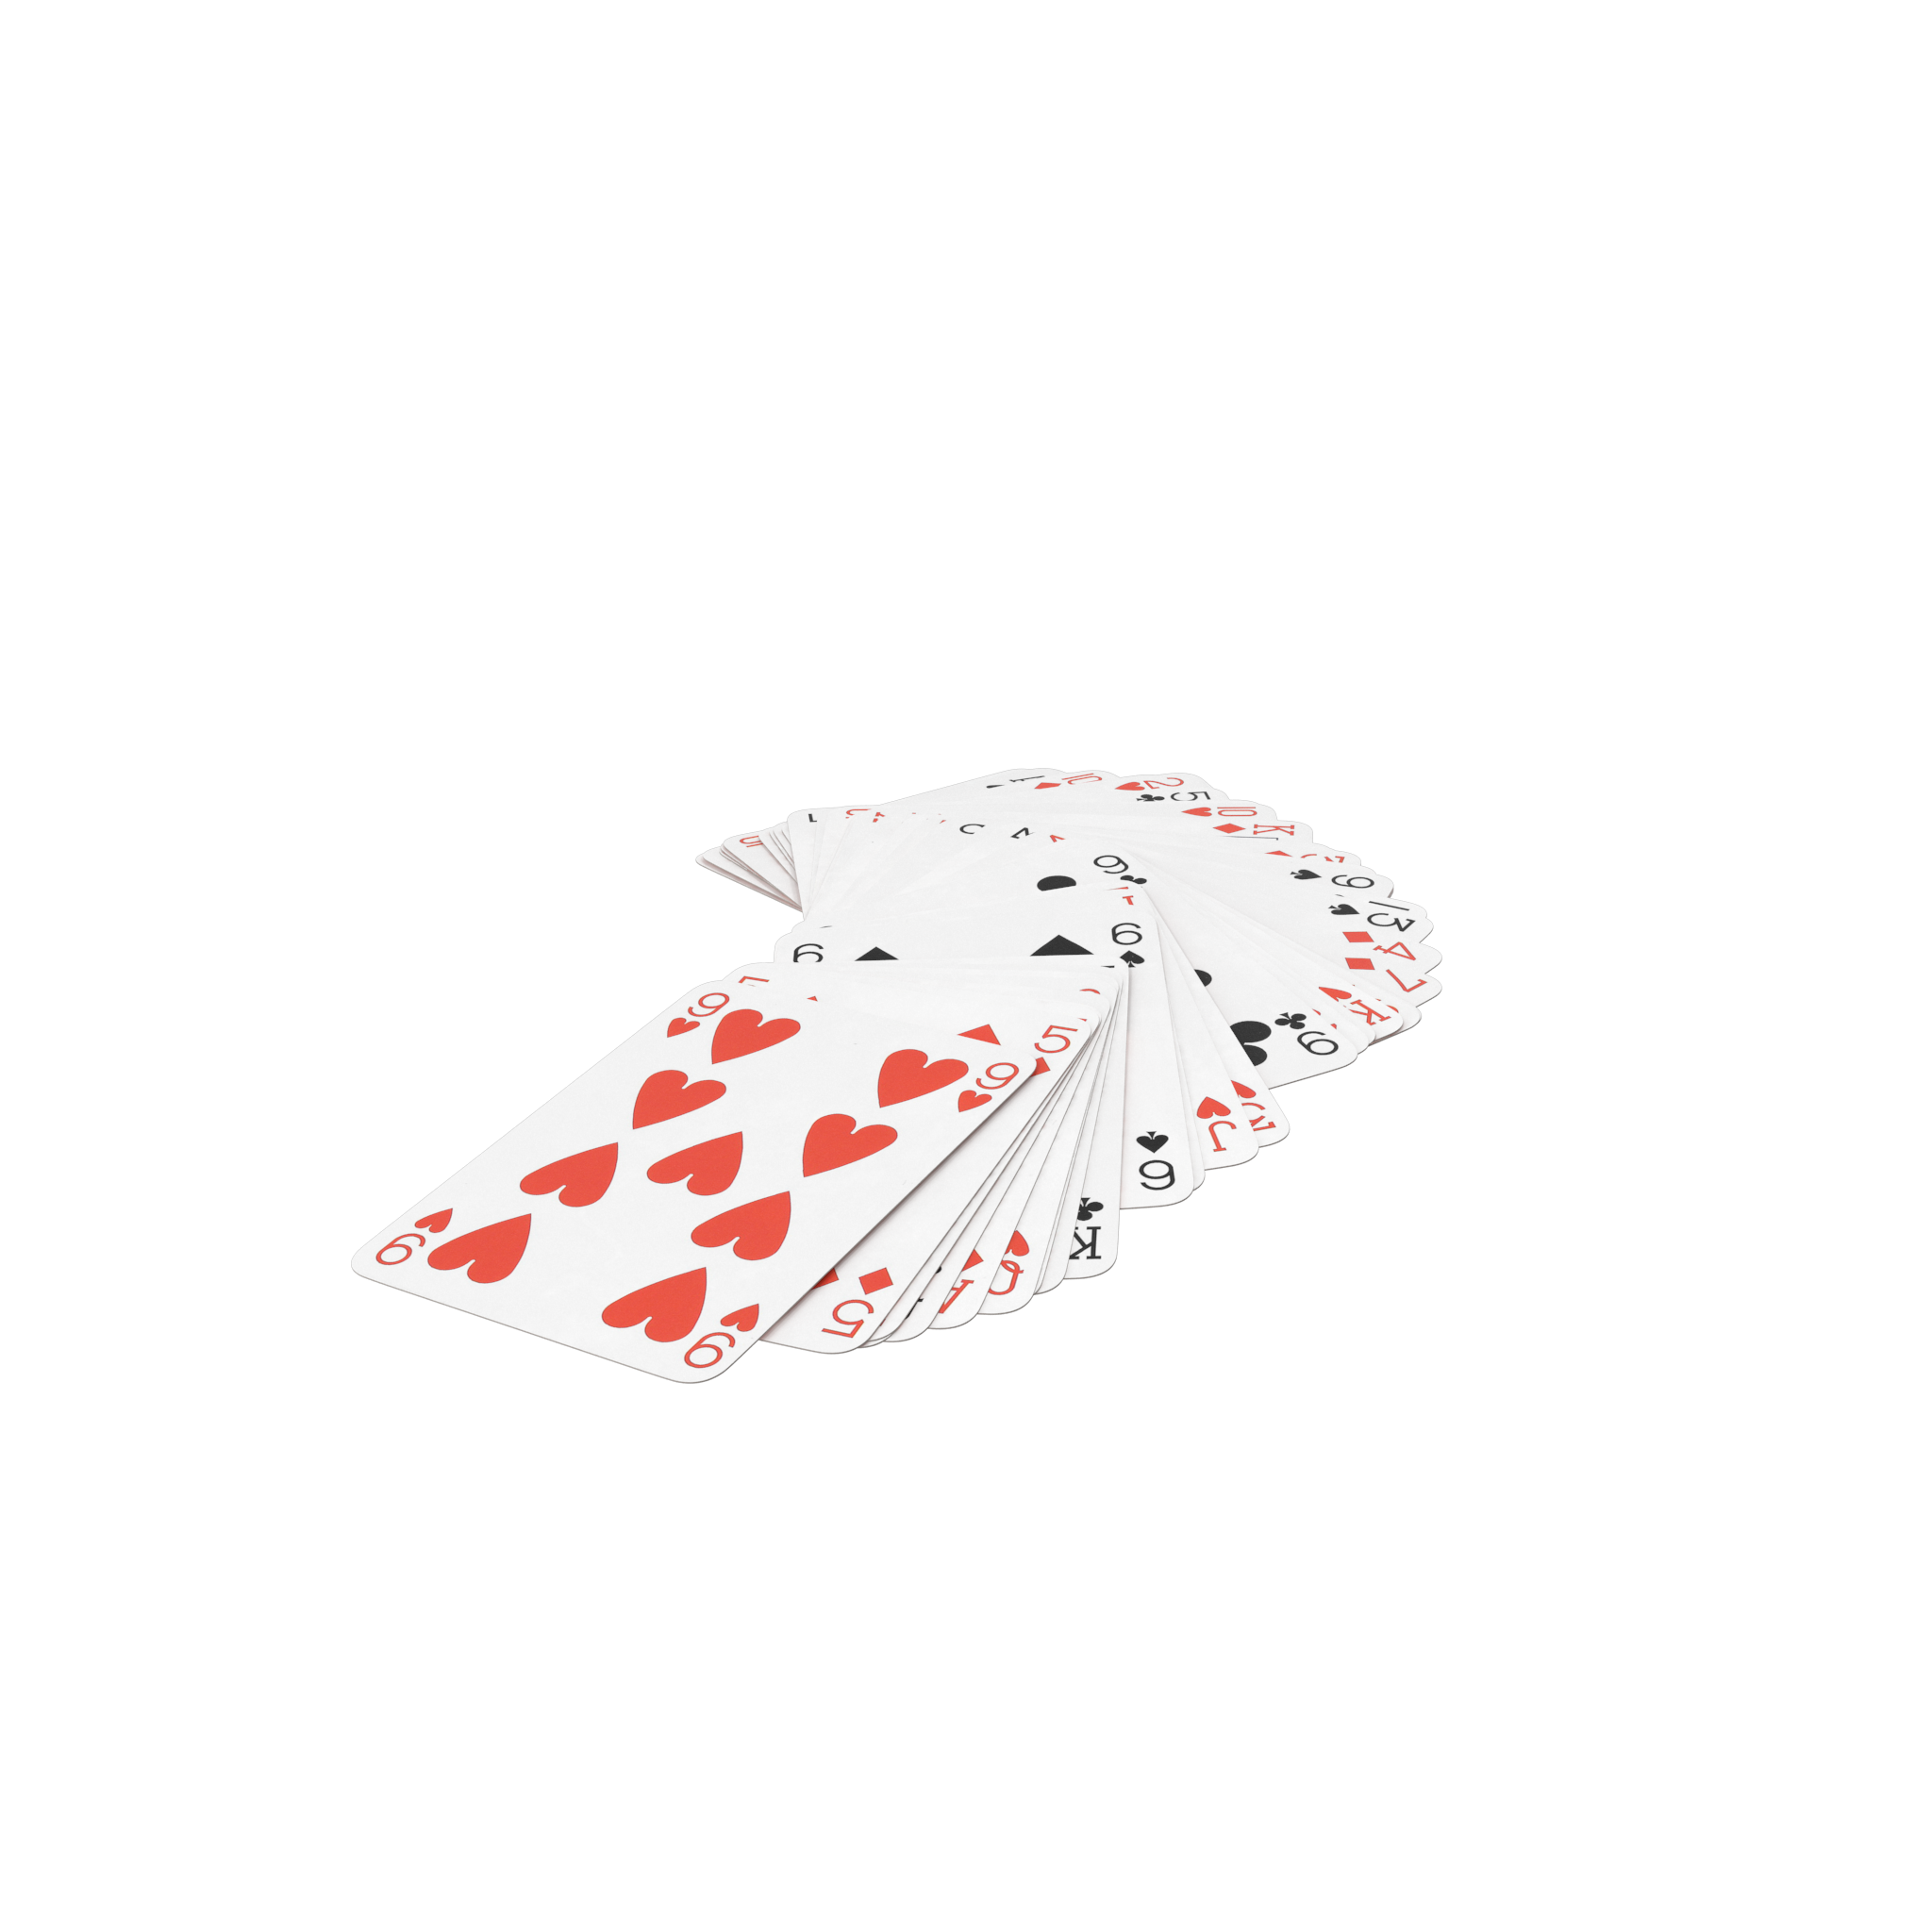 PACK OF PLAYING CARDS